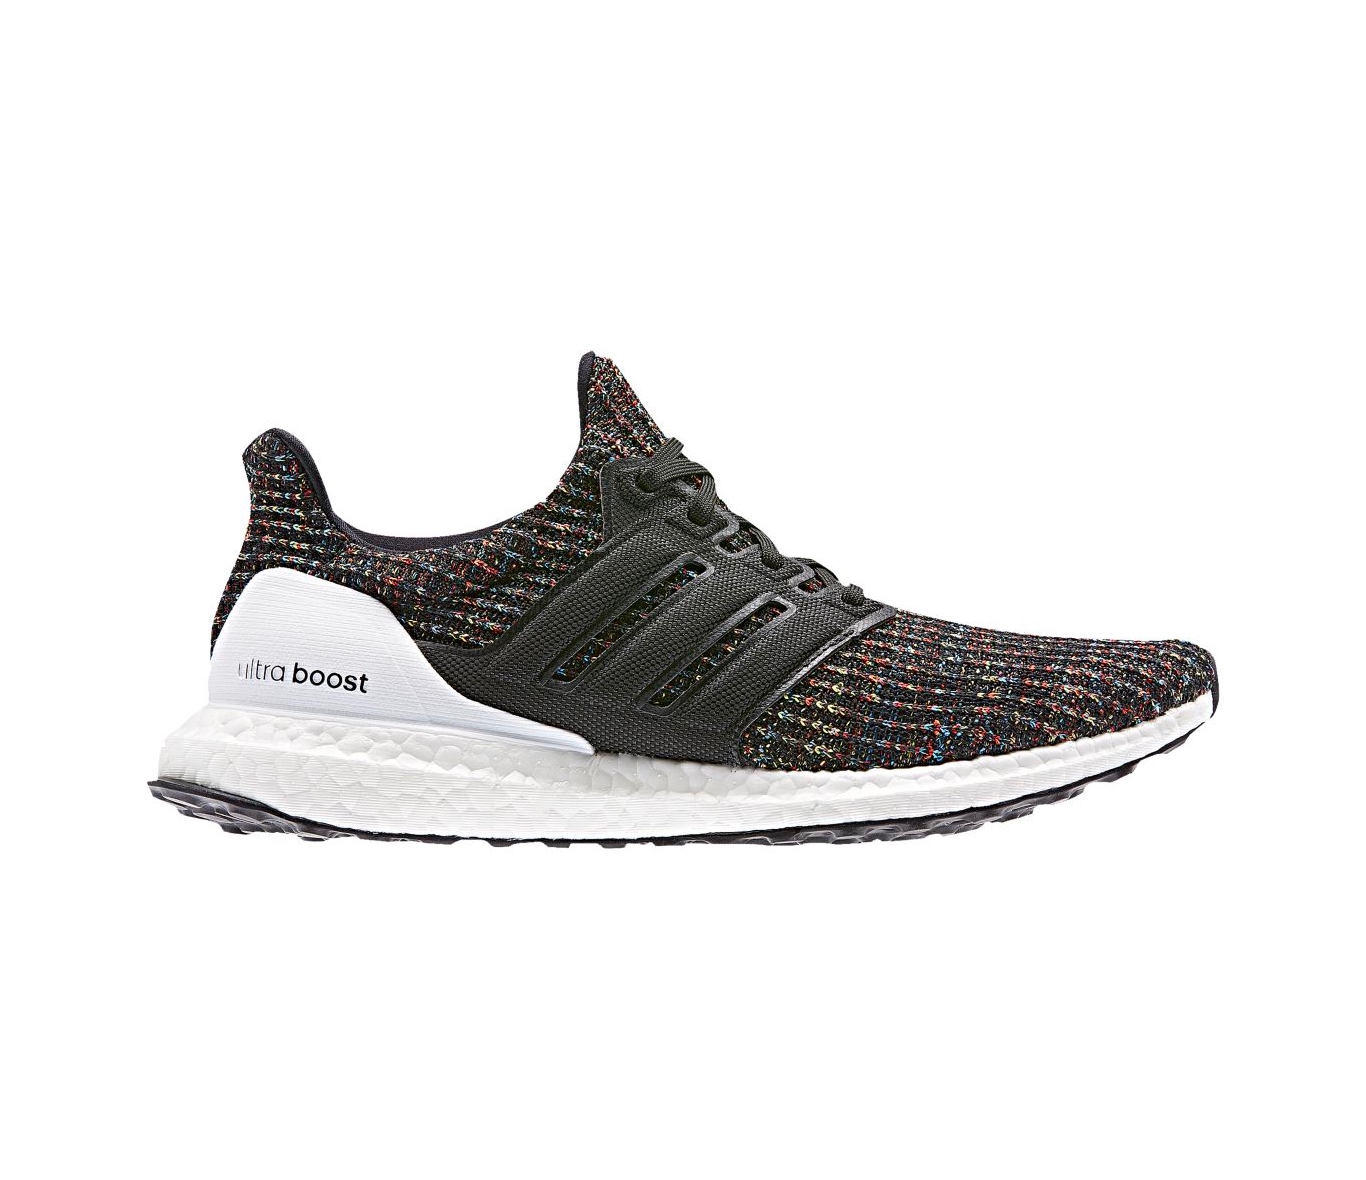 Now Available: adidas Ultra Boost 4.0 